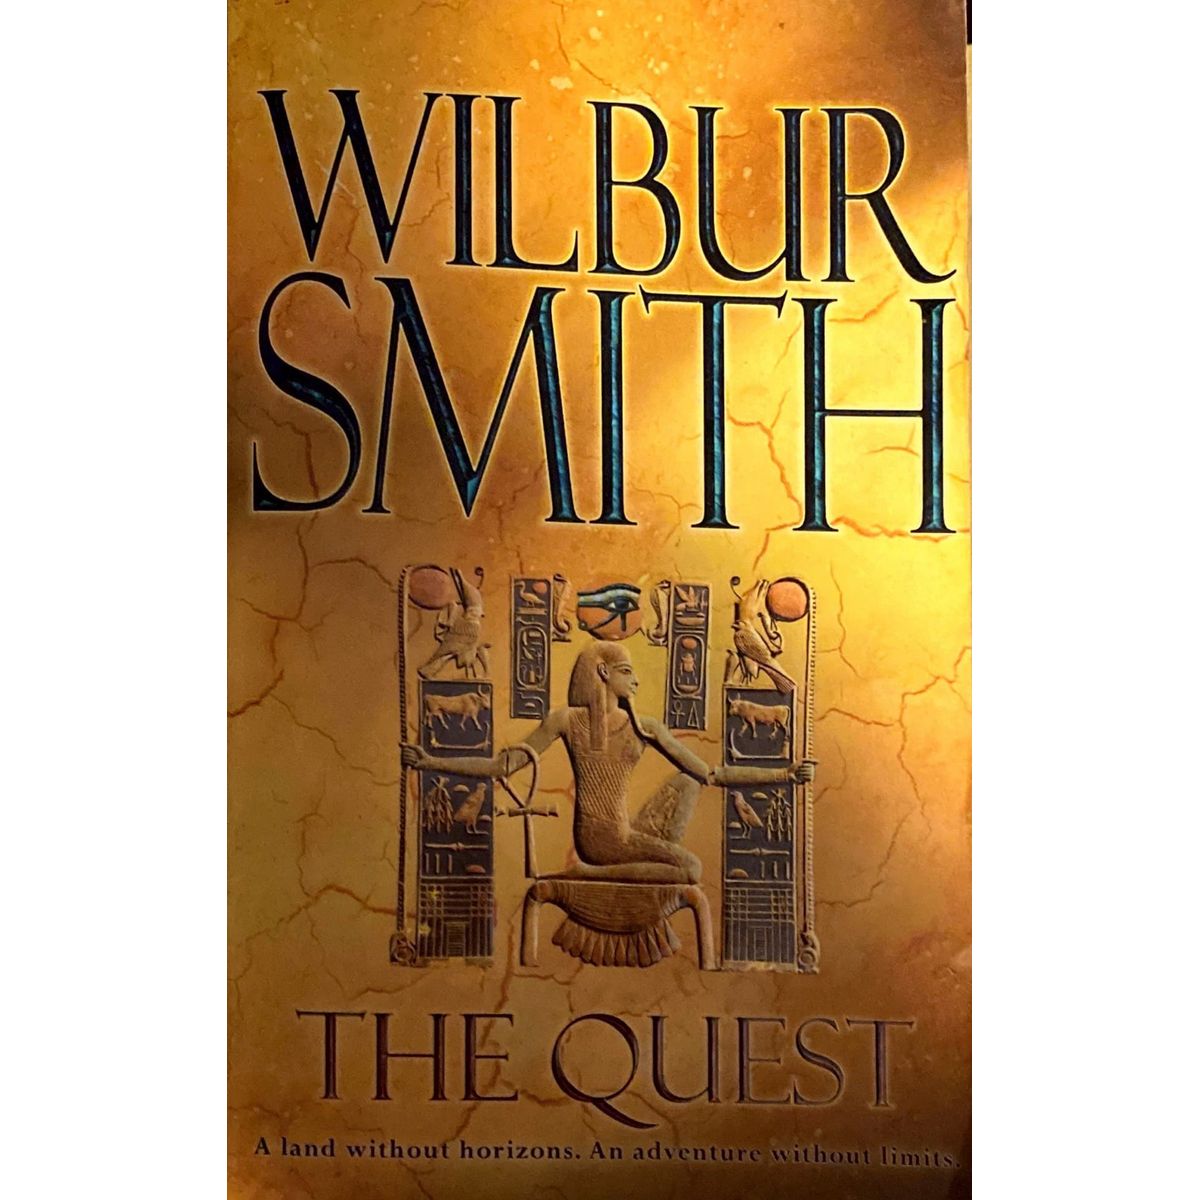 ISBN: 9781405619349 / 1405619341 - The Quest by Wilbur Smith [2007]